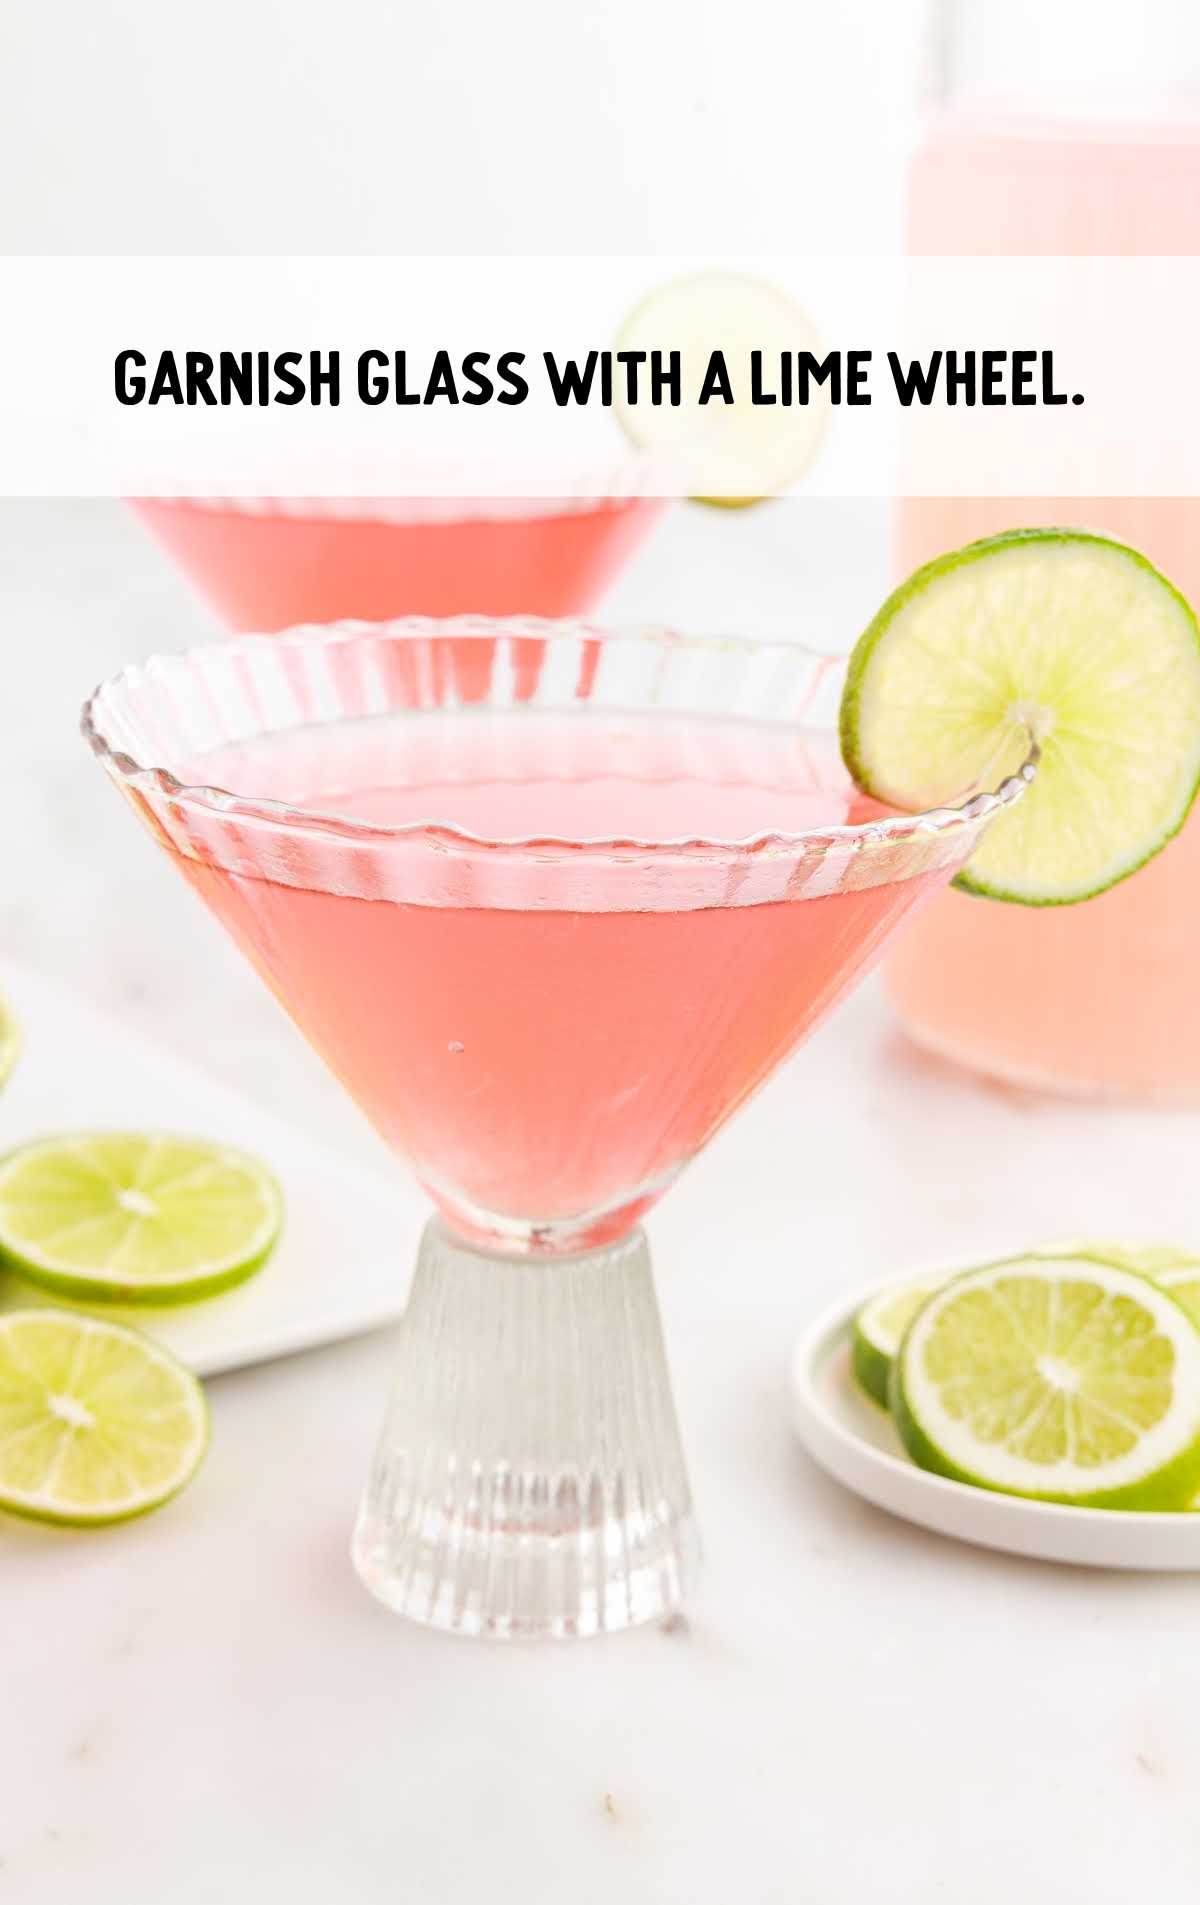 glass garnished with a lime wheel